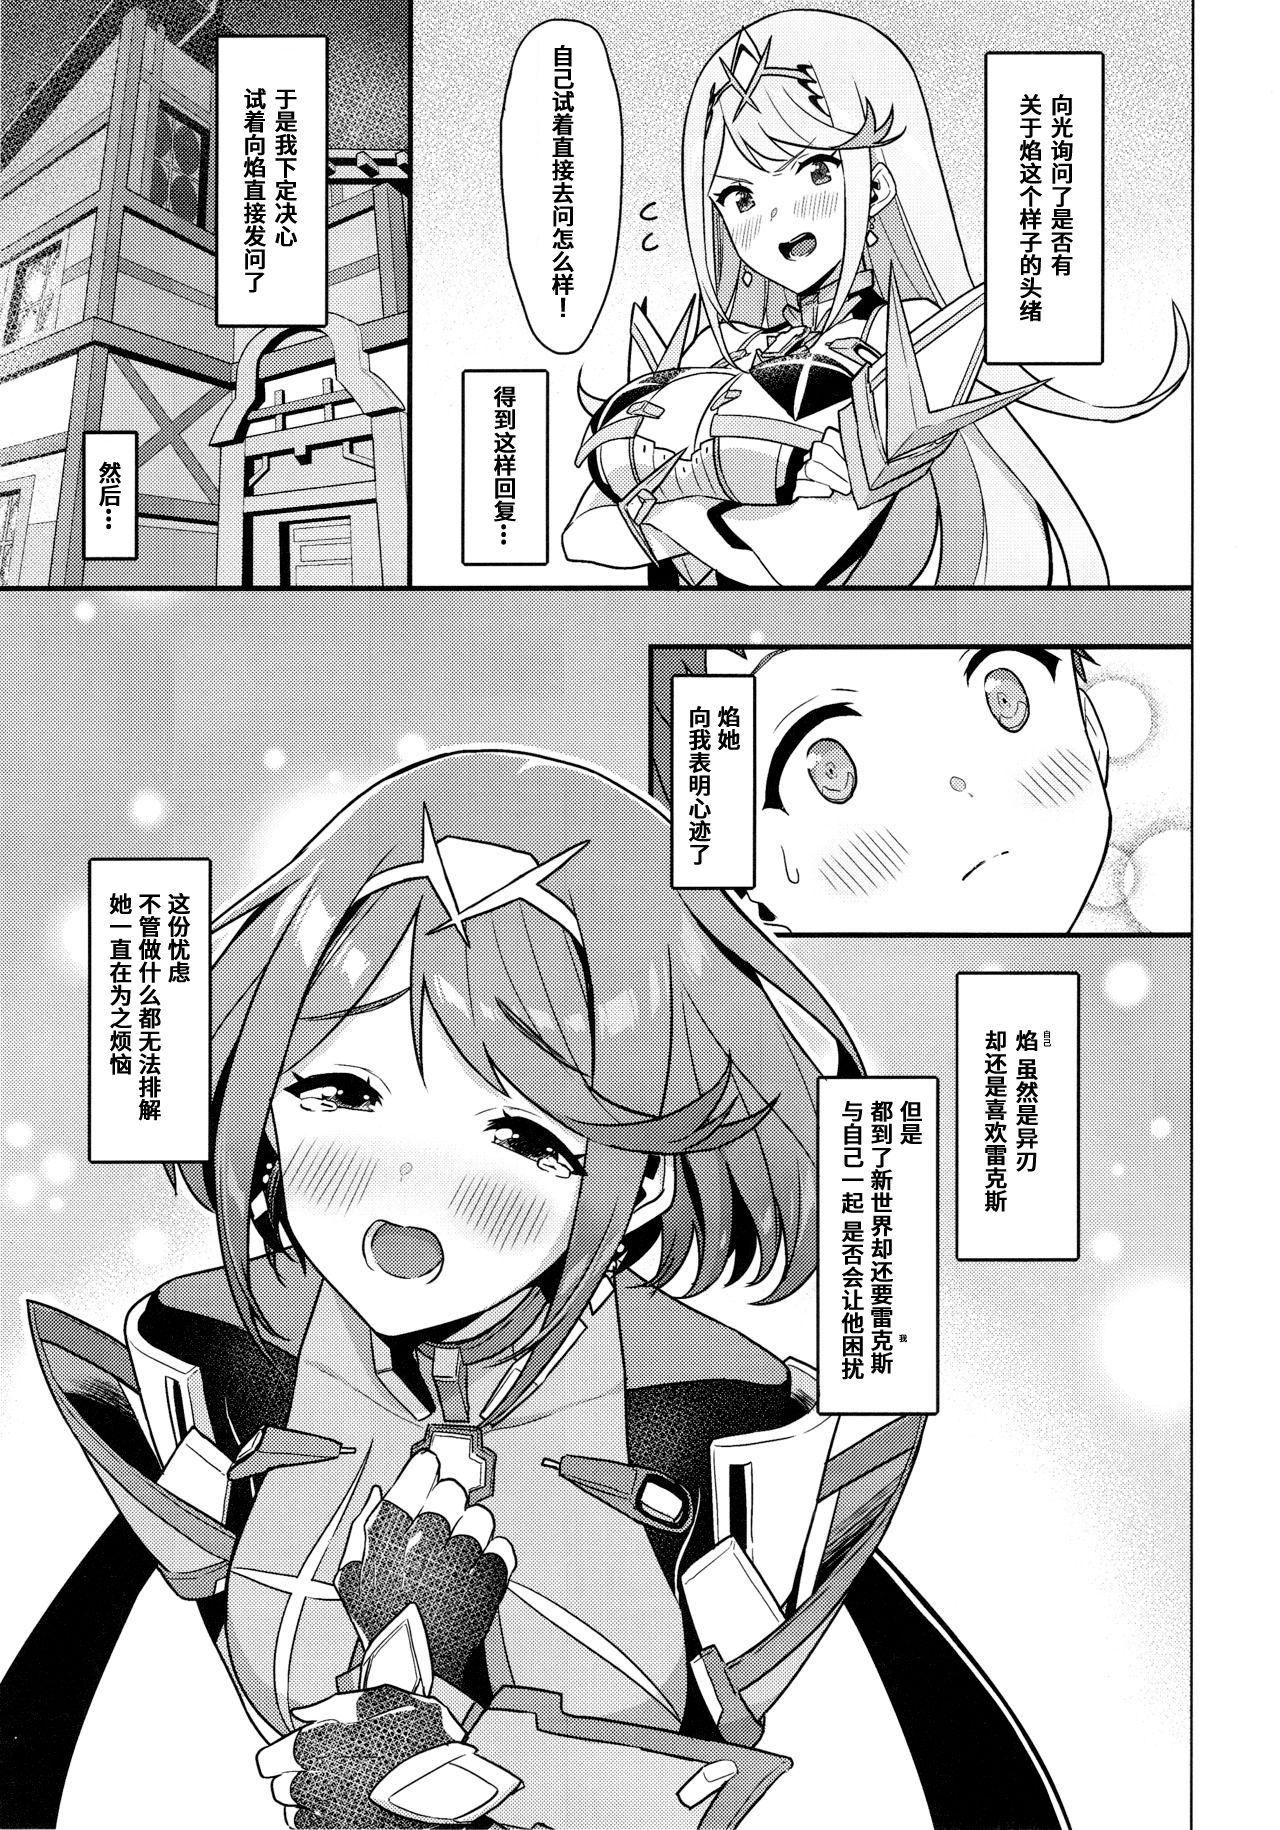 Public Chouyou no Naka e to - Xenoblade chronicles 2 Pussy To Mouth - Page 4